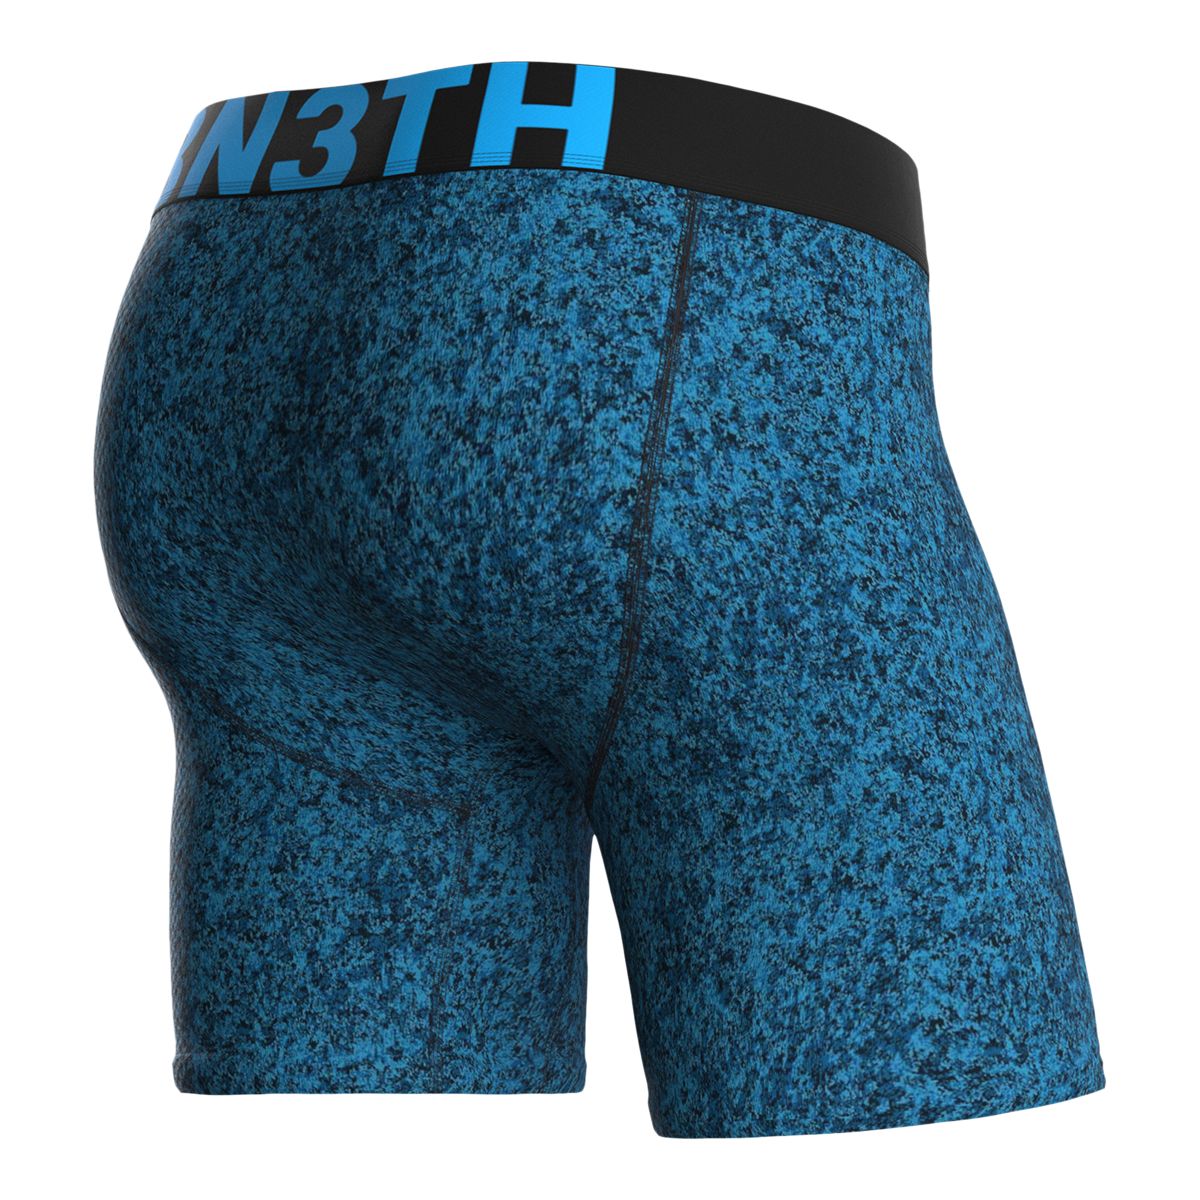 https://media-www.sportchek.ca/product/div-03-softgoods/dpt-79-clothing-accessories/sdpt-01-mens/333752011/bn3th-move-entourage-boxer-brief-q419-9d79ecdf-e728-49d9-9583-553b78b596e8-jpgrendition.jpg?imdensity=1&imwidth=1244&impolicy=mZoom